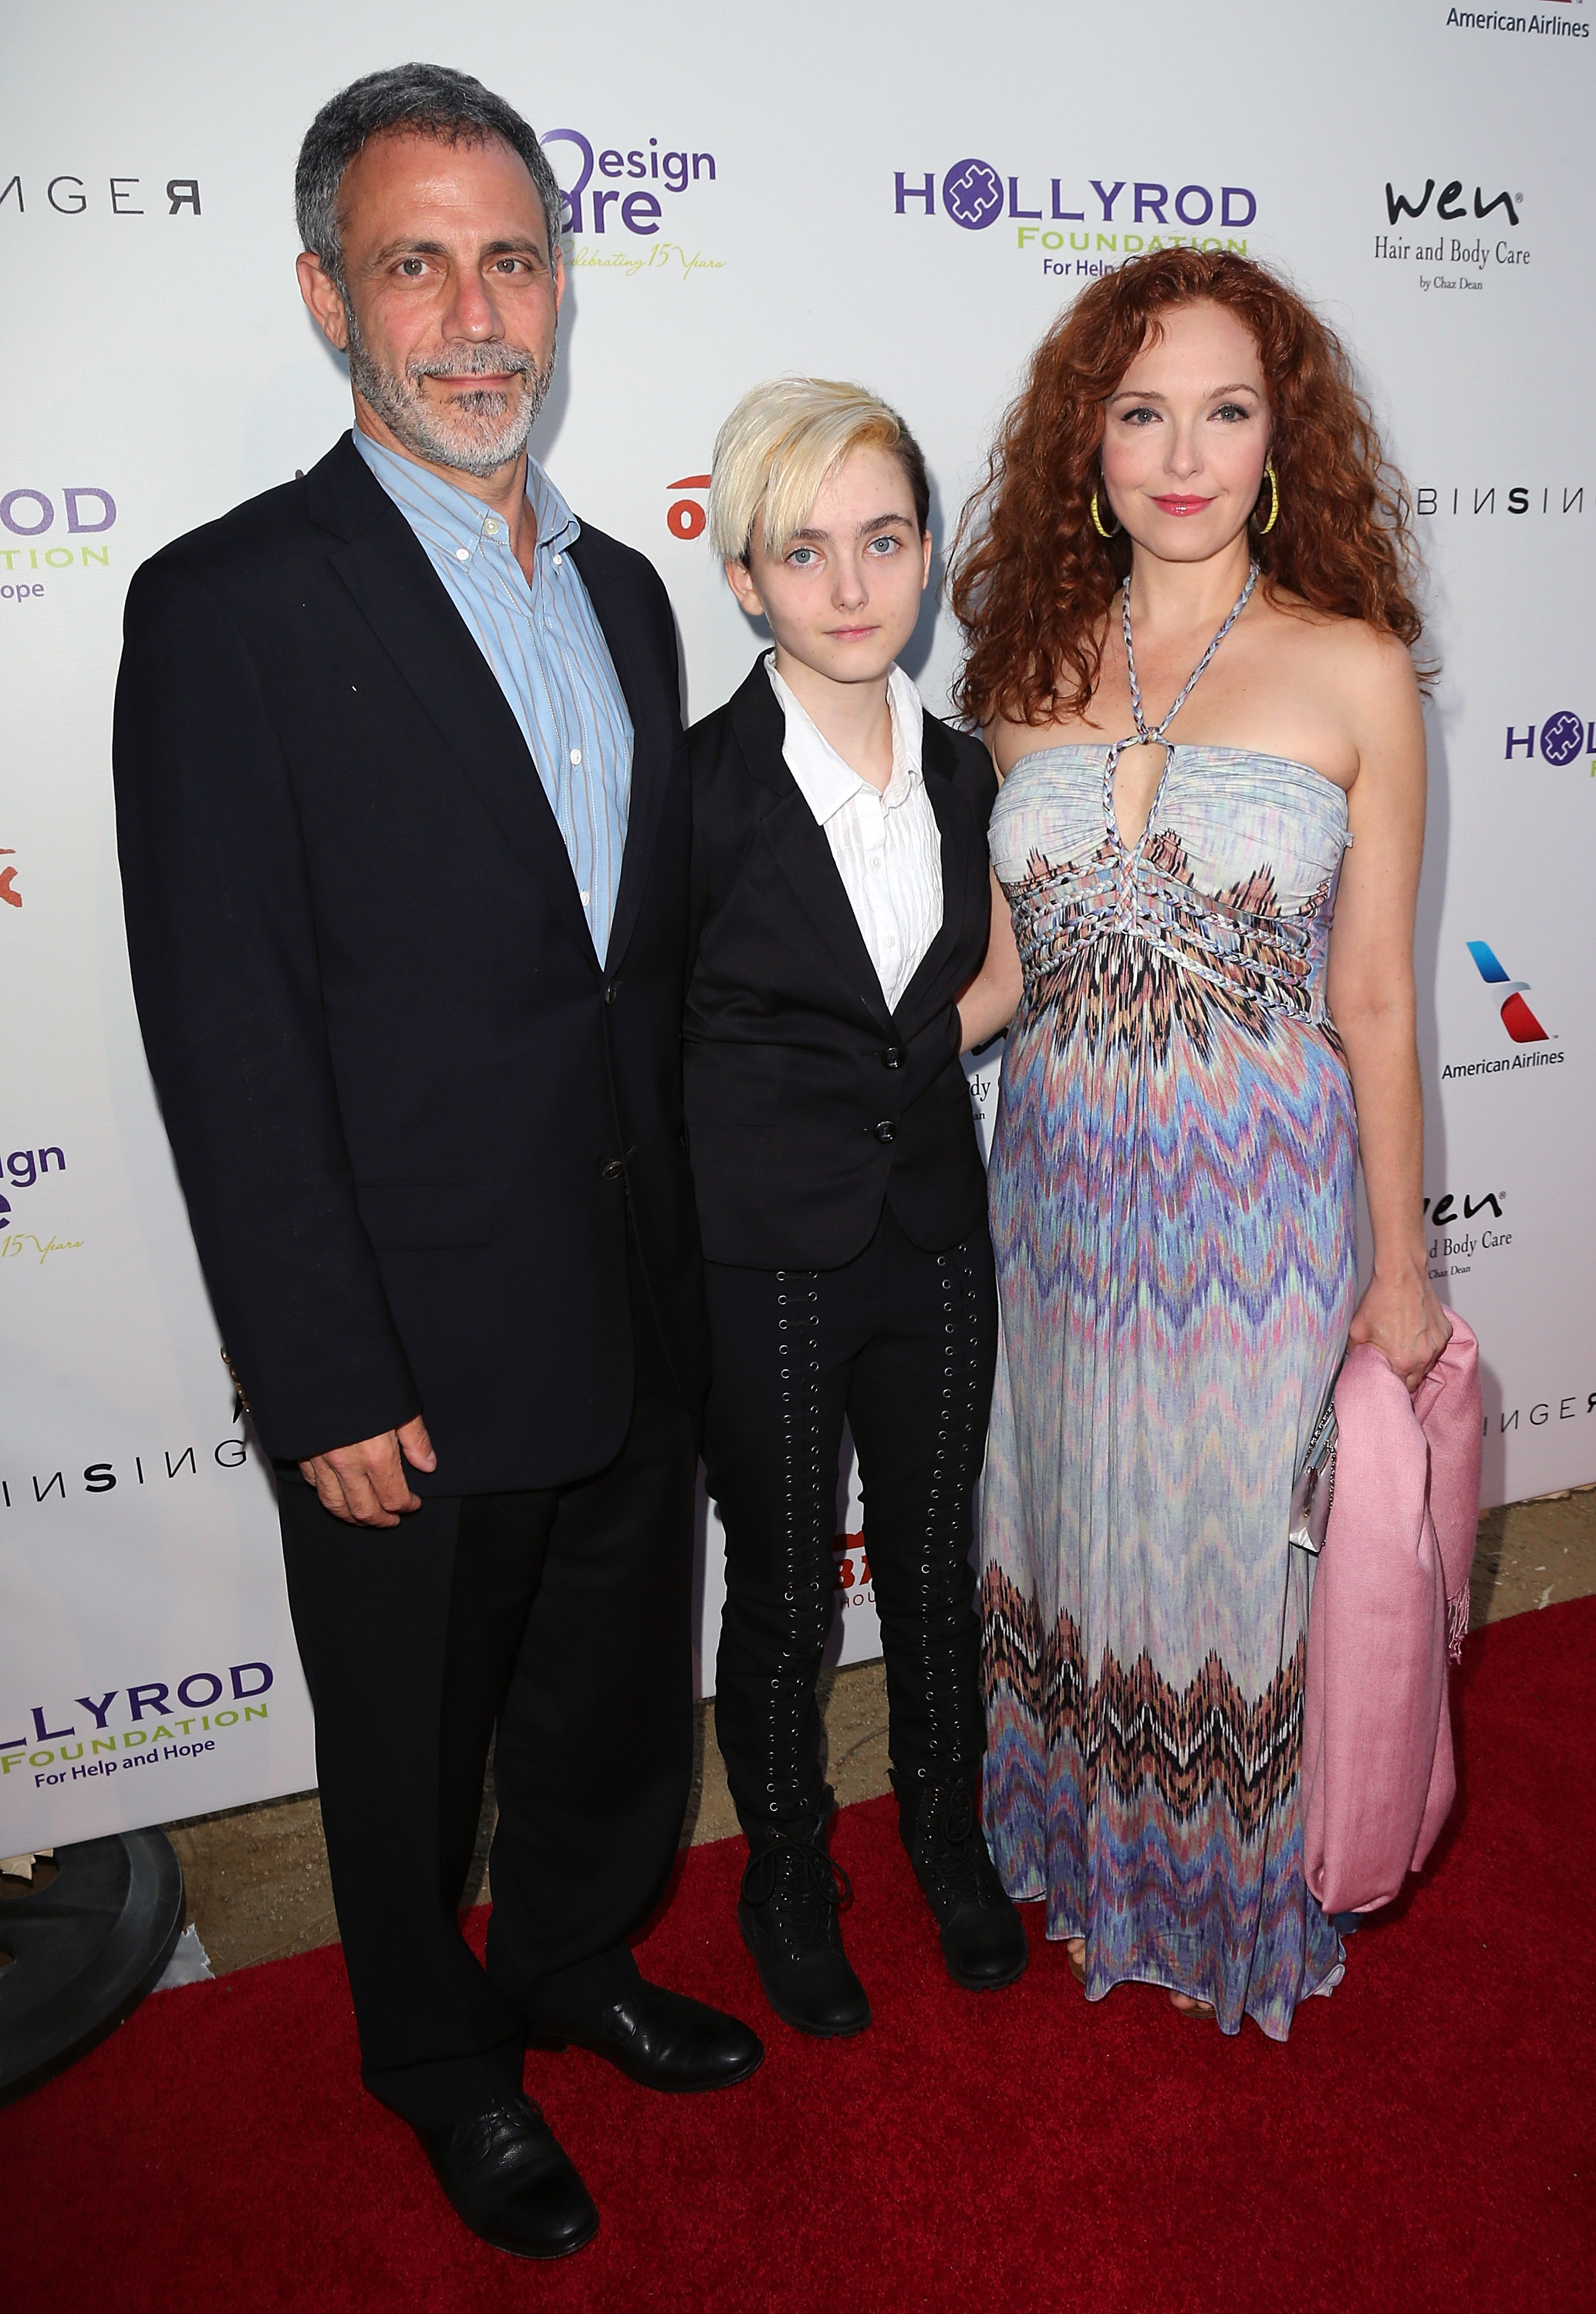 Michael Plonsker, Noah Ritter and Amy Yasbeck attend the 15th Annual DesignCare, on July 27, 2013, in Malibu, California. | Source: Getty Images